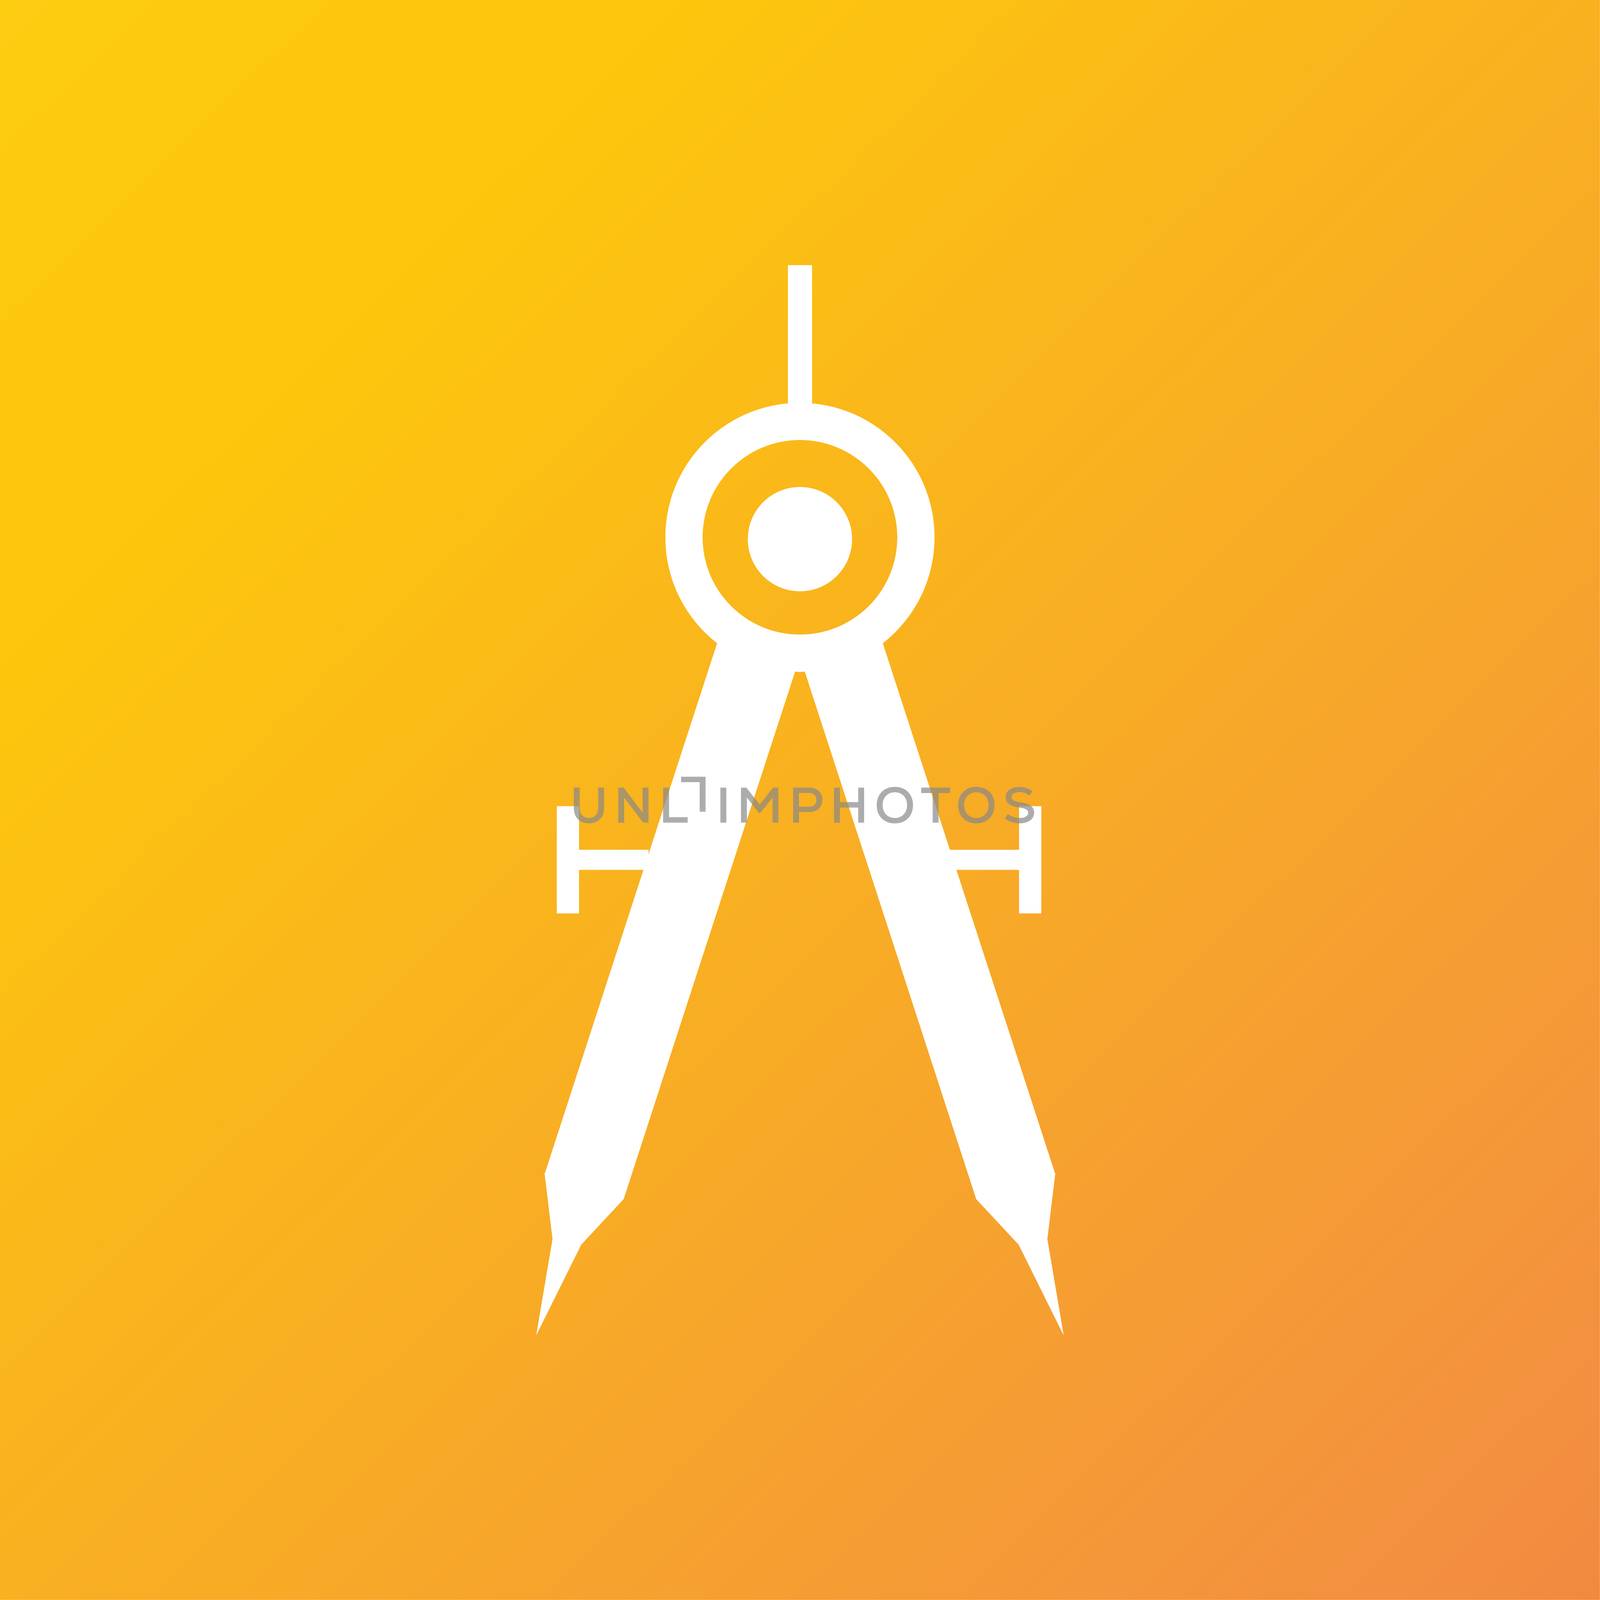 Mathematical Compass icon symbol Flat modern web design with long shadow and space for your text. illustration